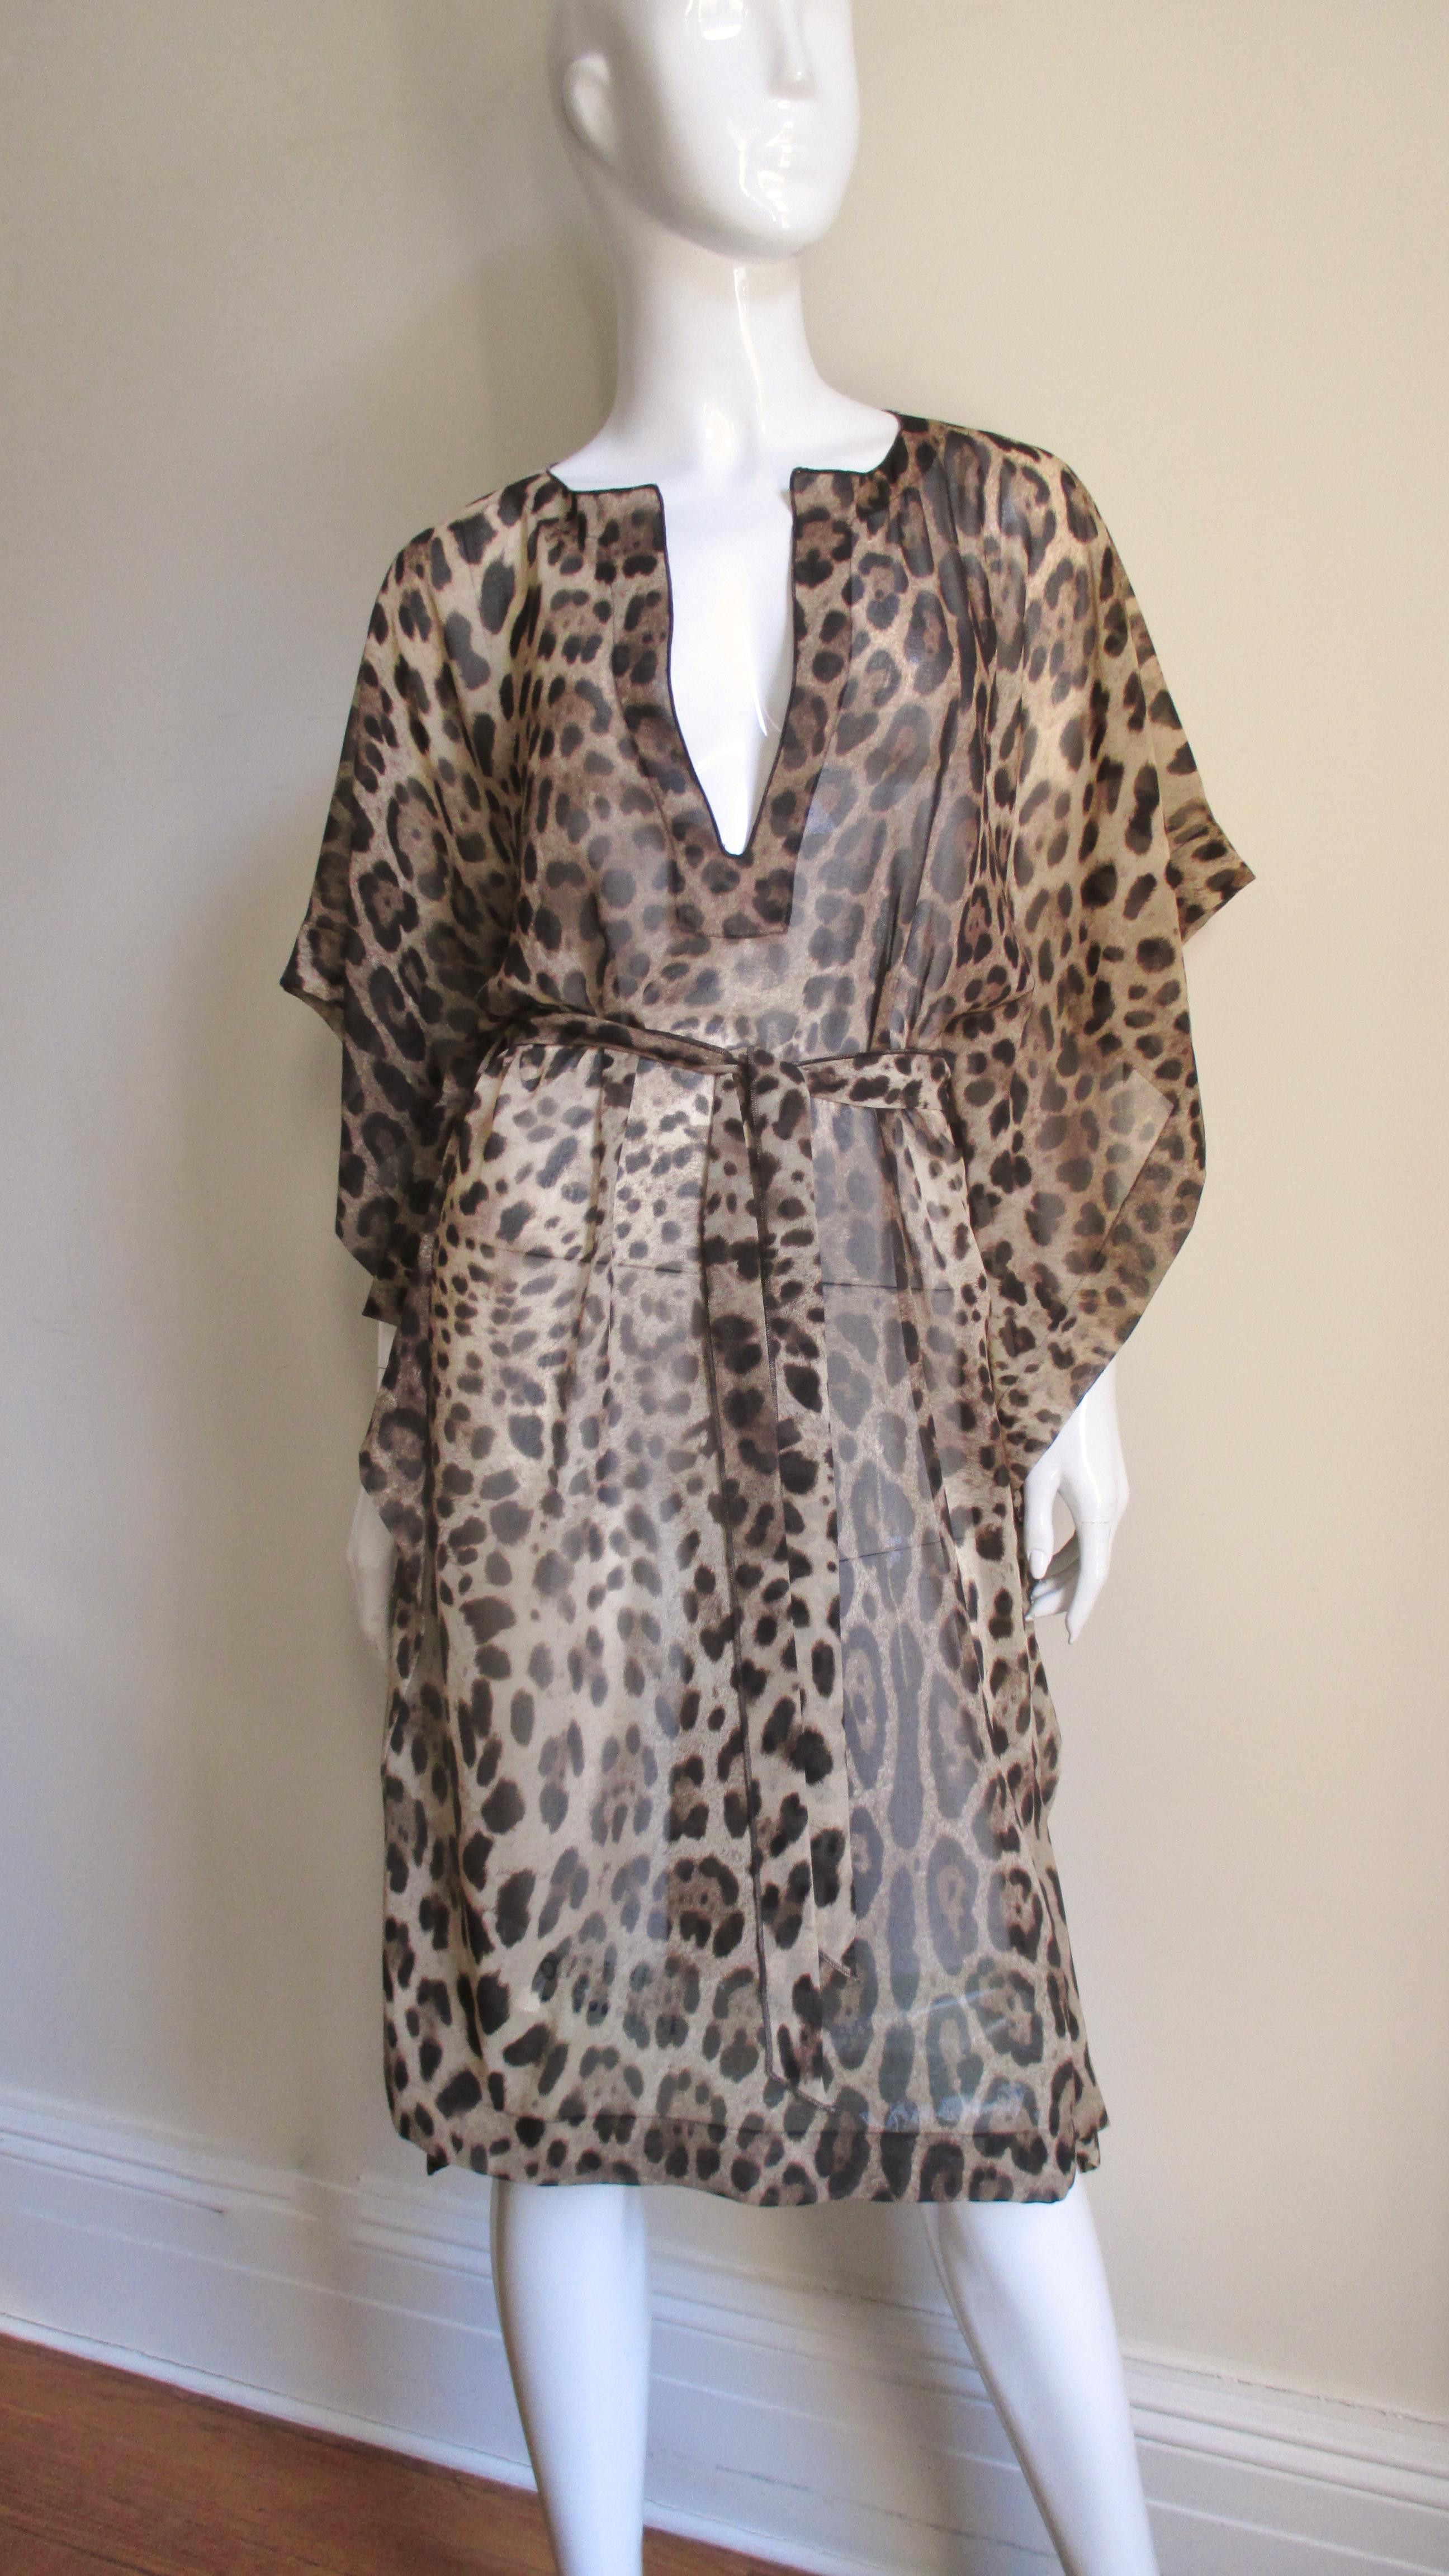 A fabulous silk leopard print caftan dress from Dolce & Gabbana.  It has a V neckline, drop shoulders,  and comes with a matching tie belt.  The dress is unlined and slips on over the head.
Fits sizes Small, Medium, Large.

Bust to 44